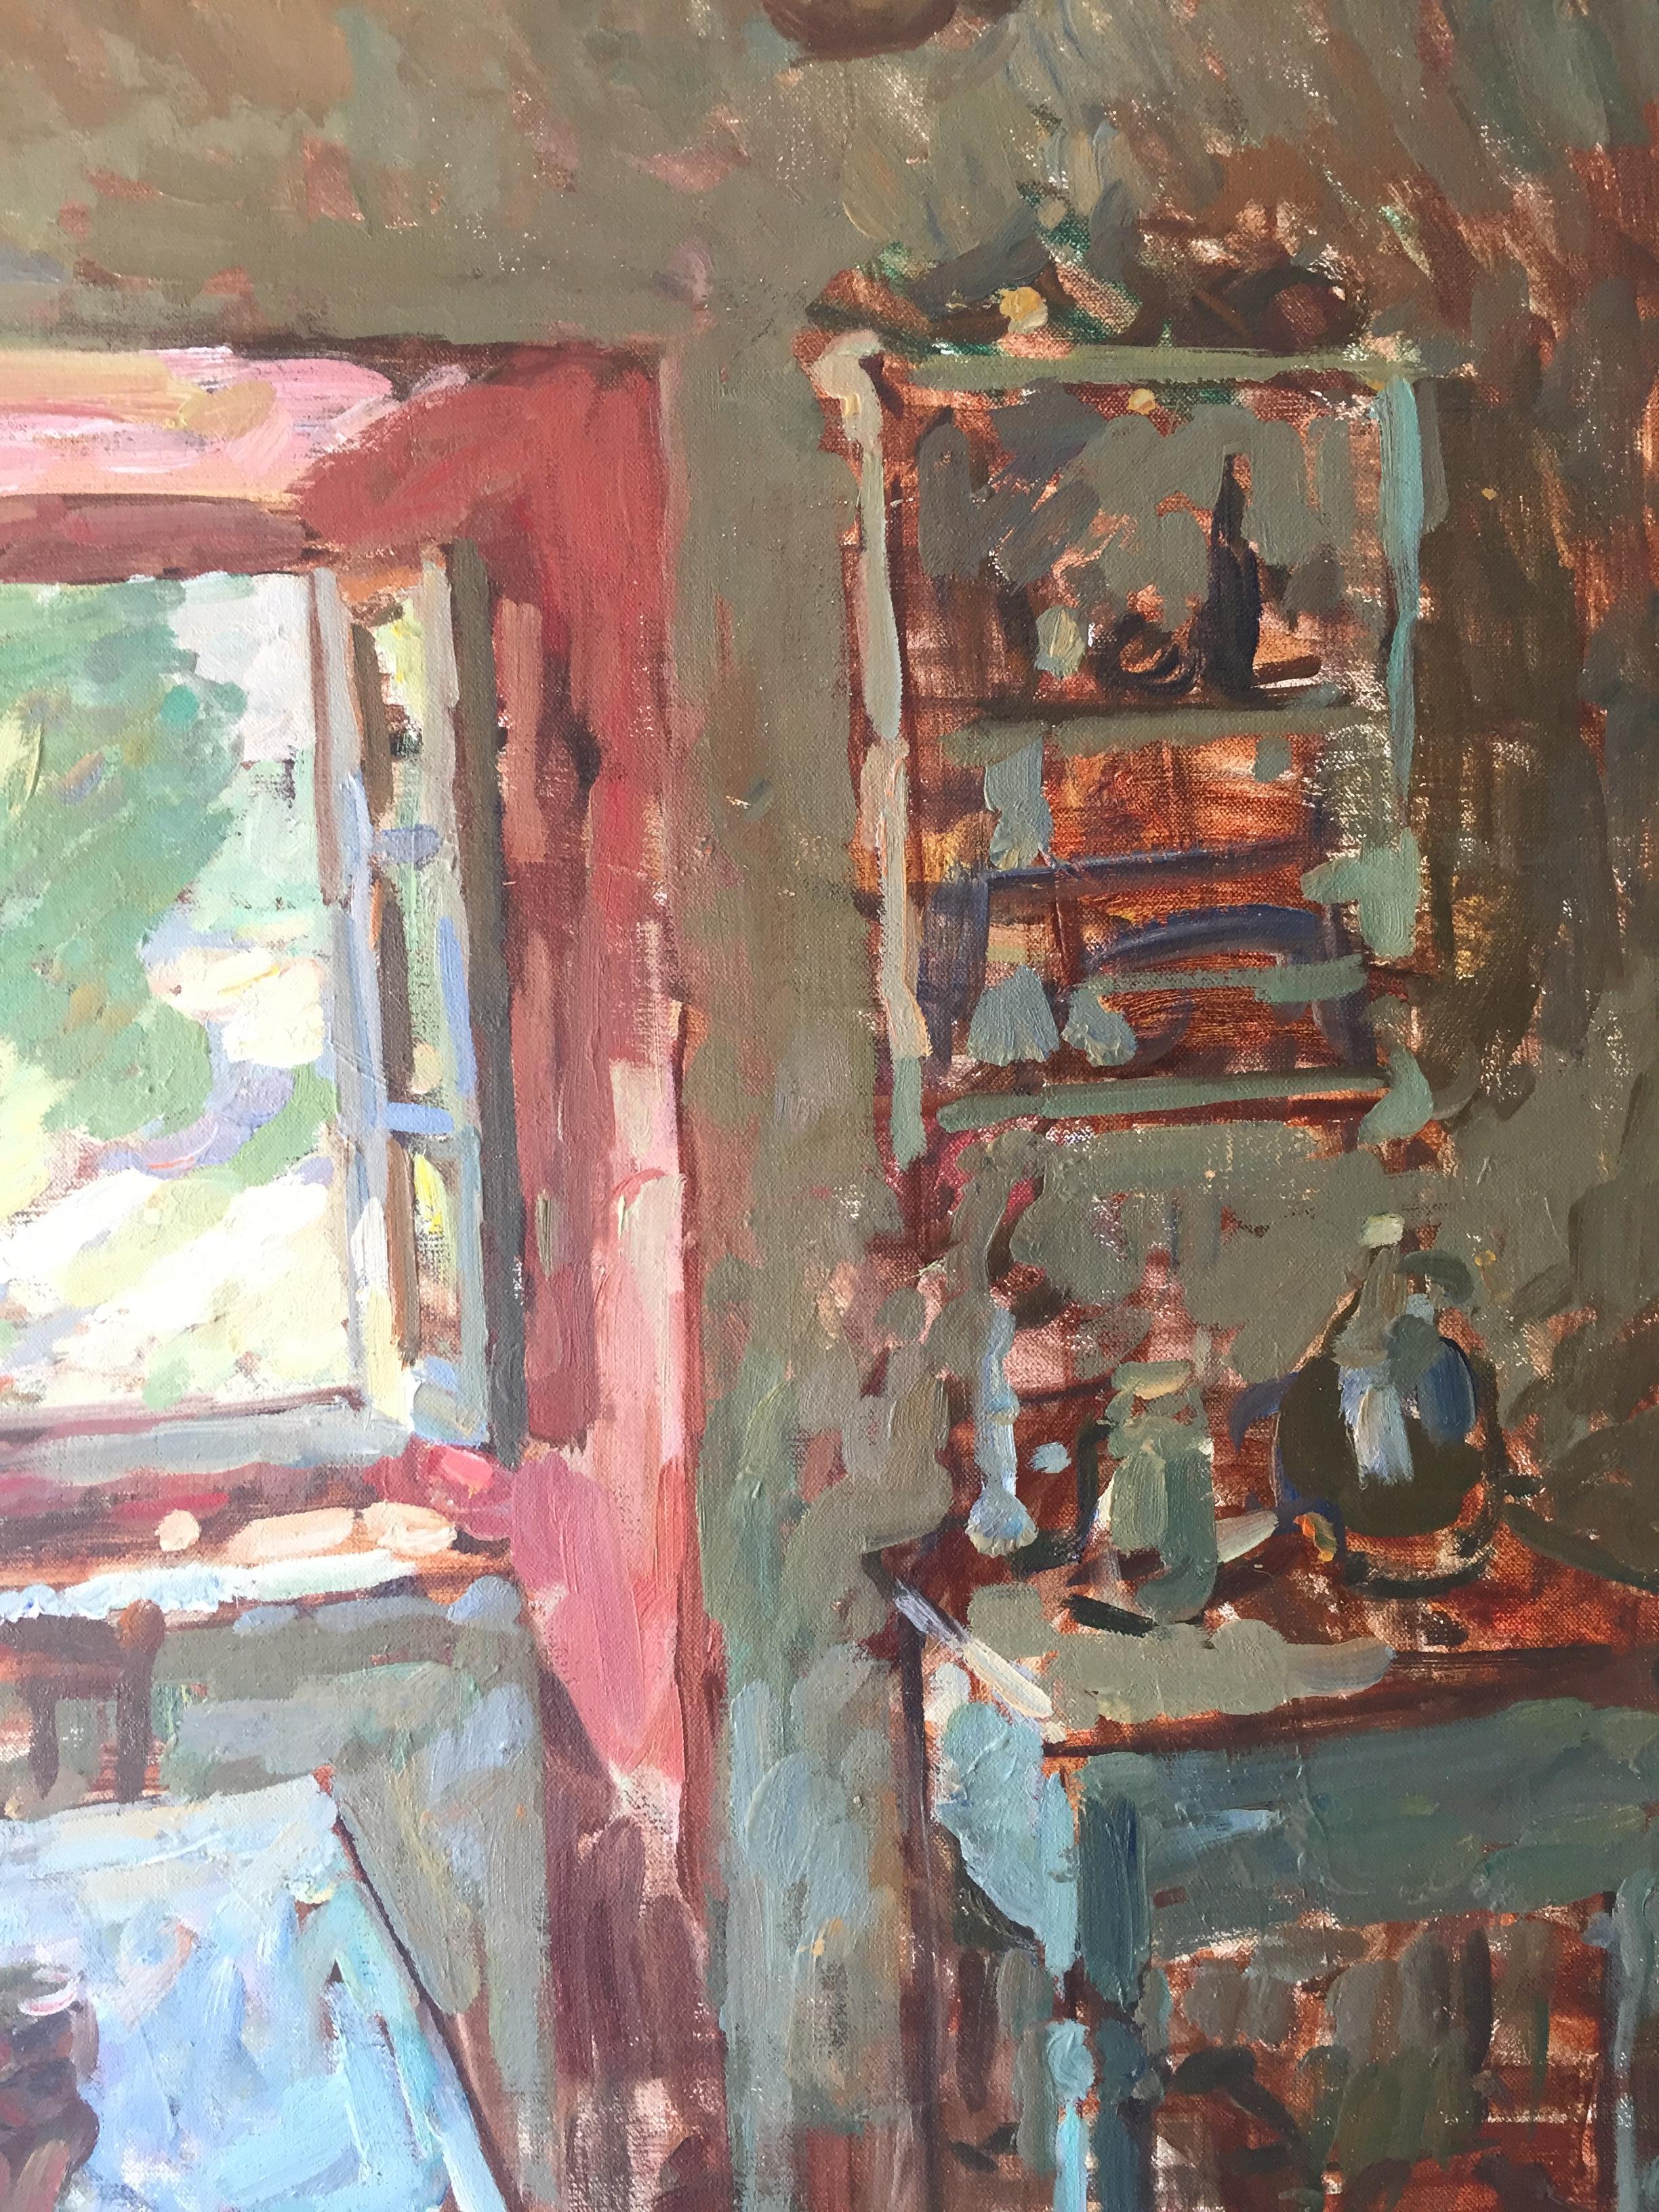 An oil on canvas painting of a kitchen. An open window filled with colors and light, cascades natural light into the nook. A small sitting area, with a chair pulled out insists one's recent departure. Clearly a space that is lived in.

Ben Fenske